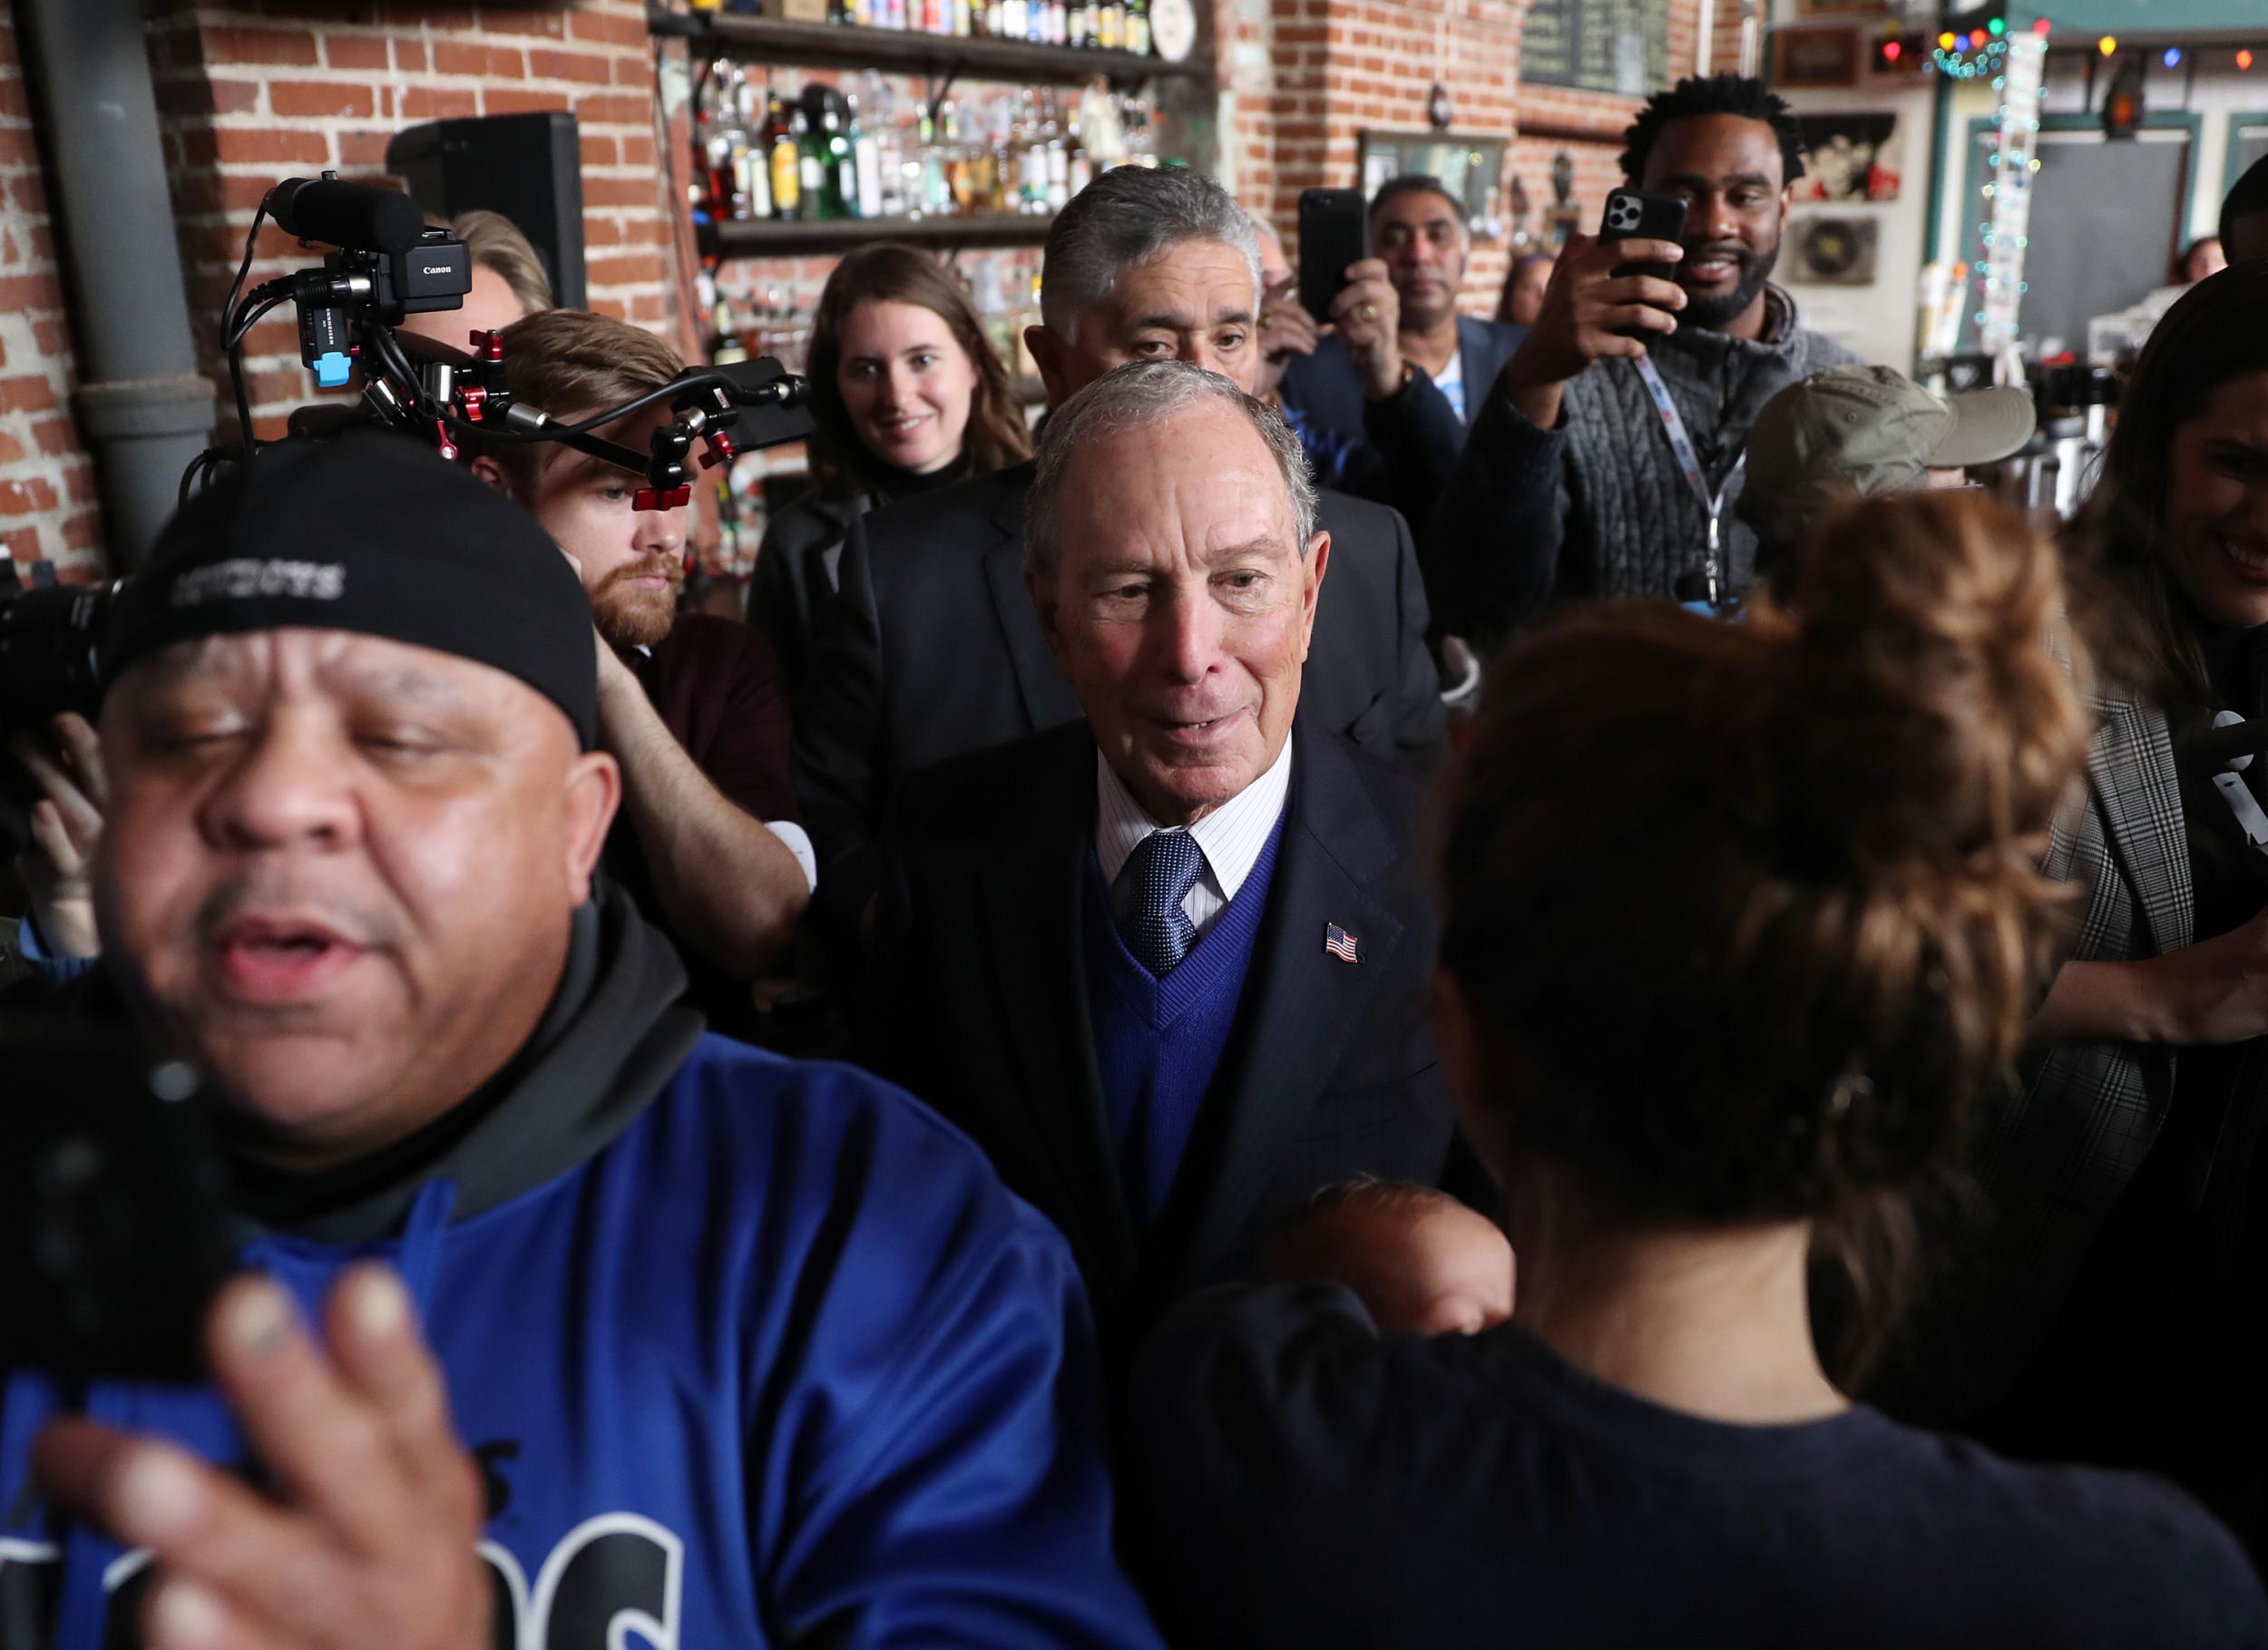 The billionaire ex-mayor Michael Bloomberg campaigning in Tennessee